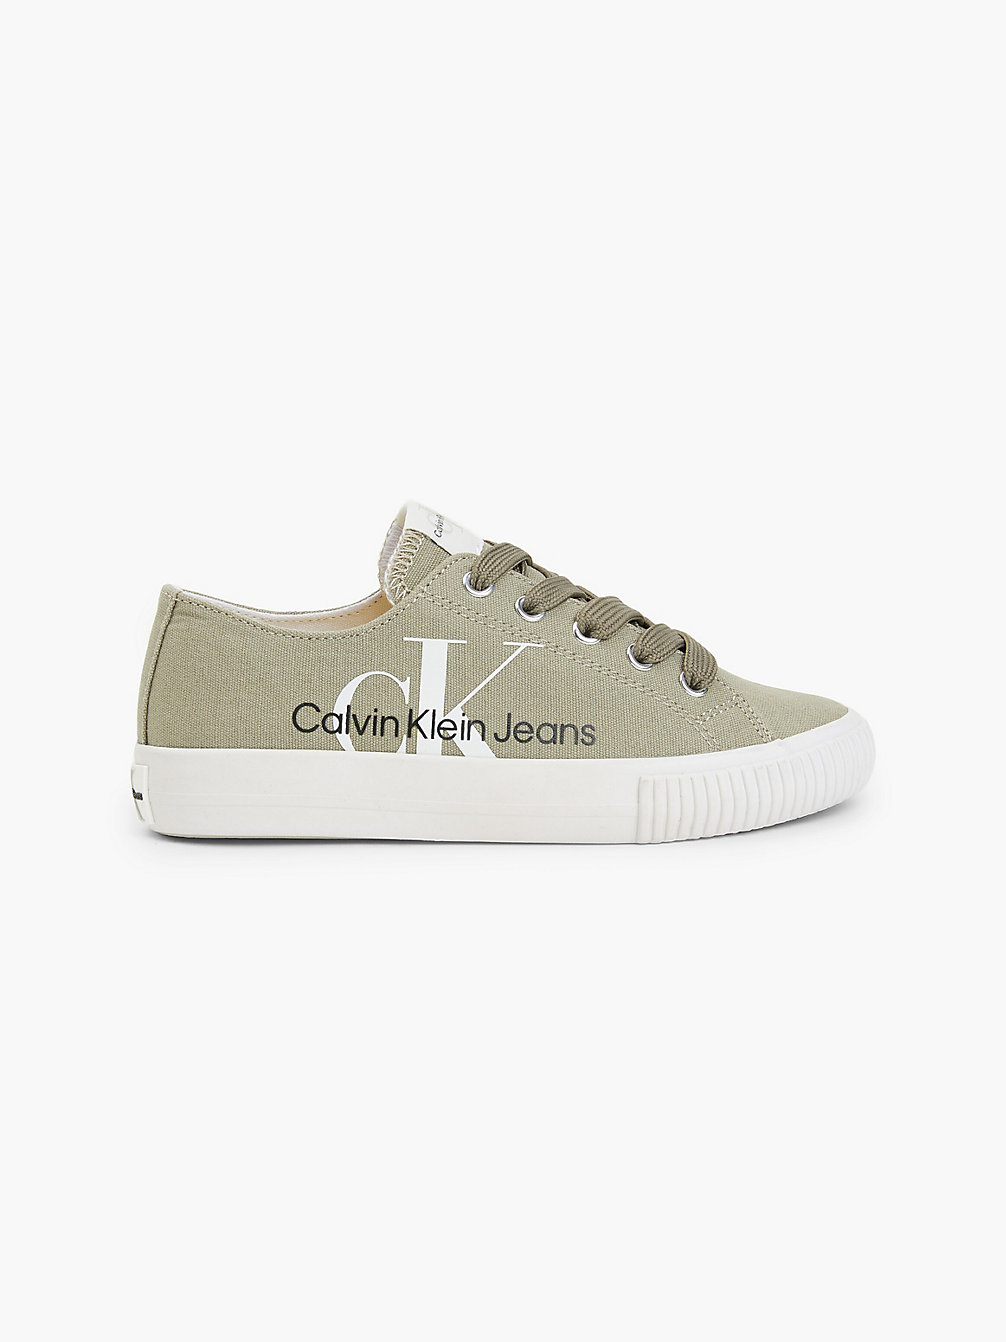 MILITARY GREEN Recycled Canvas Trainers undefined kids unisex Calvin Klein